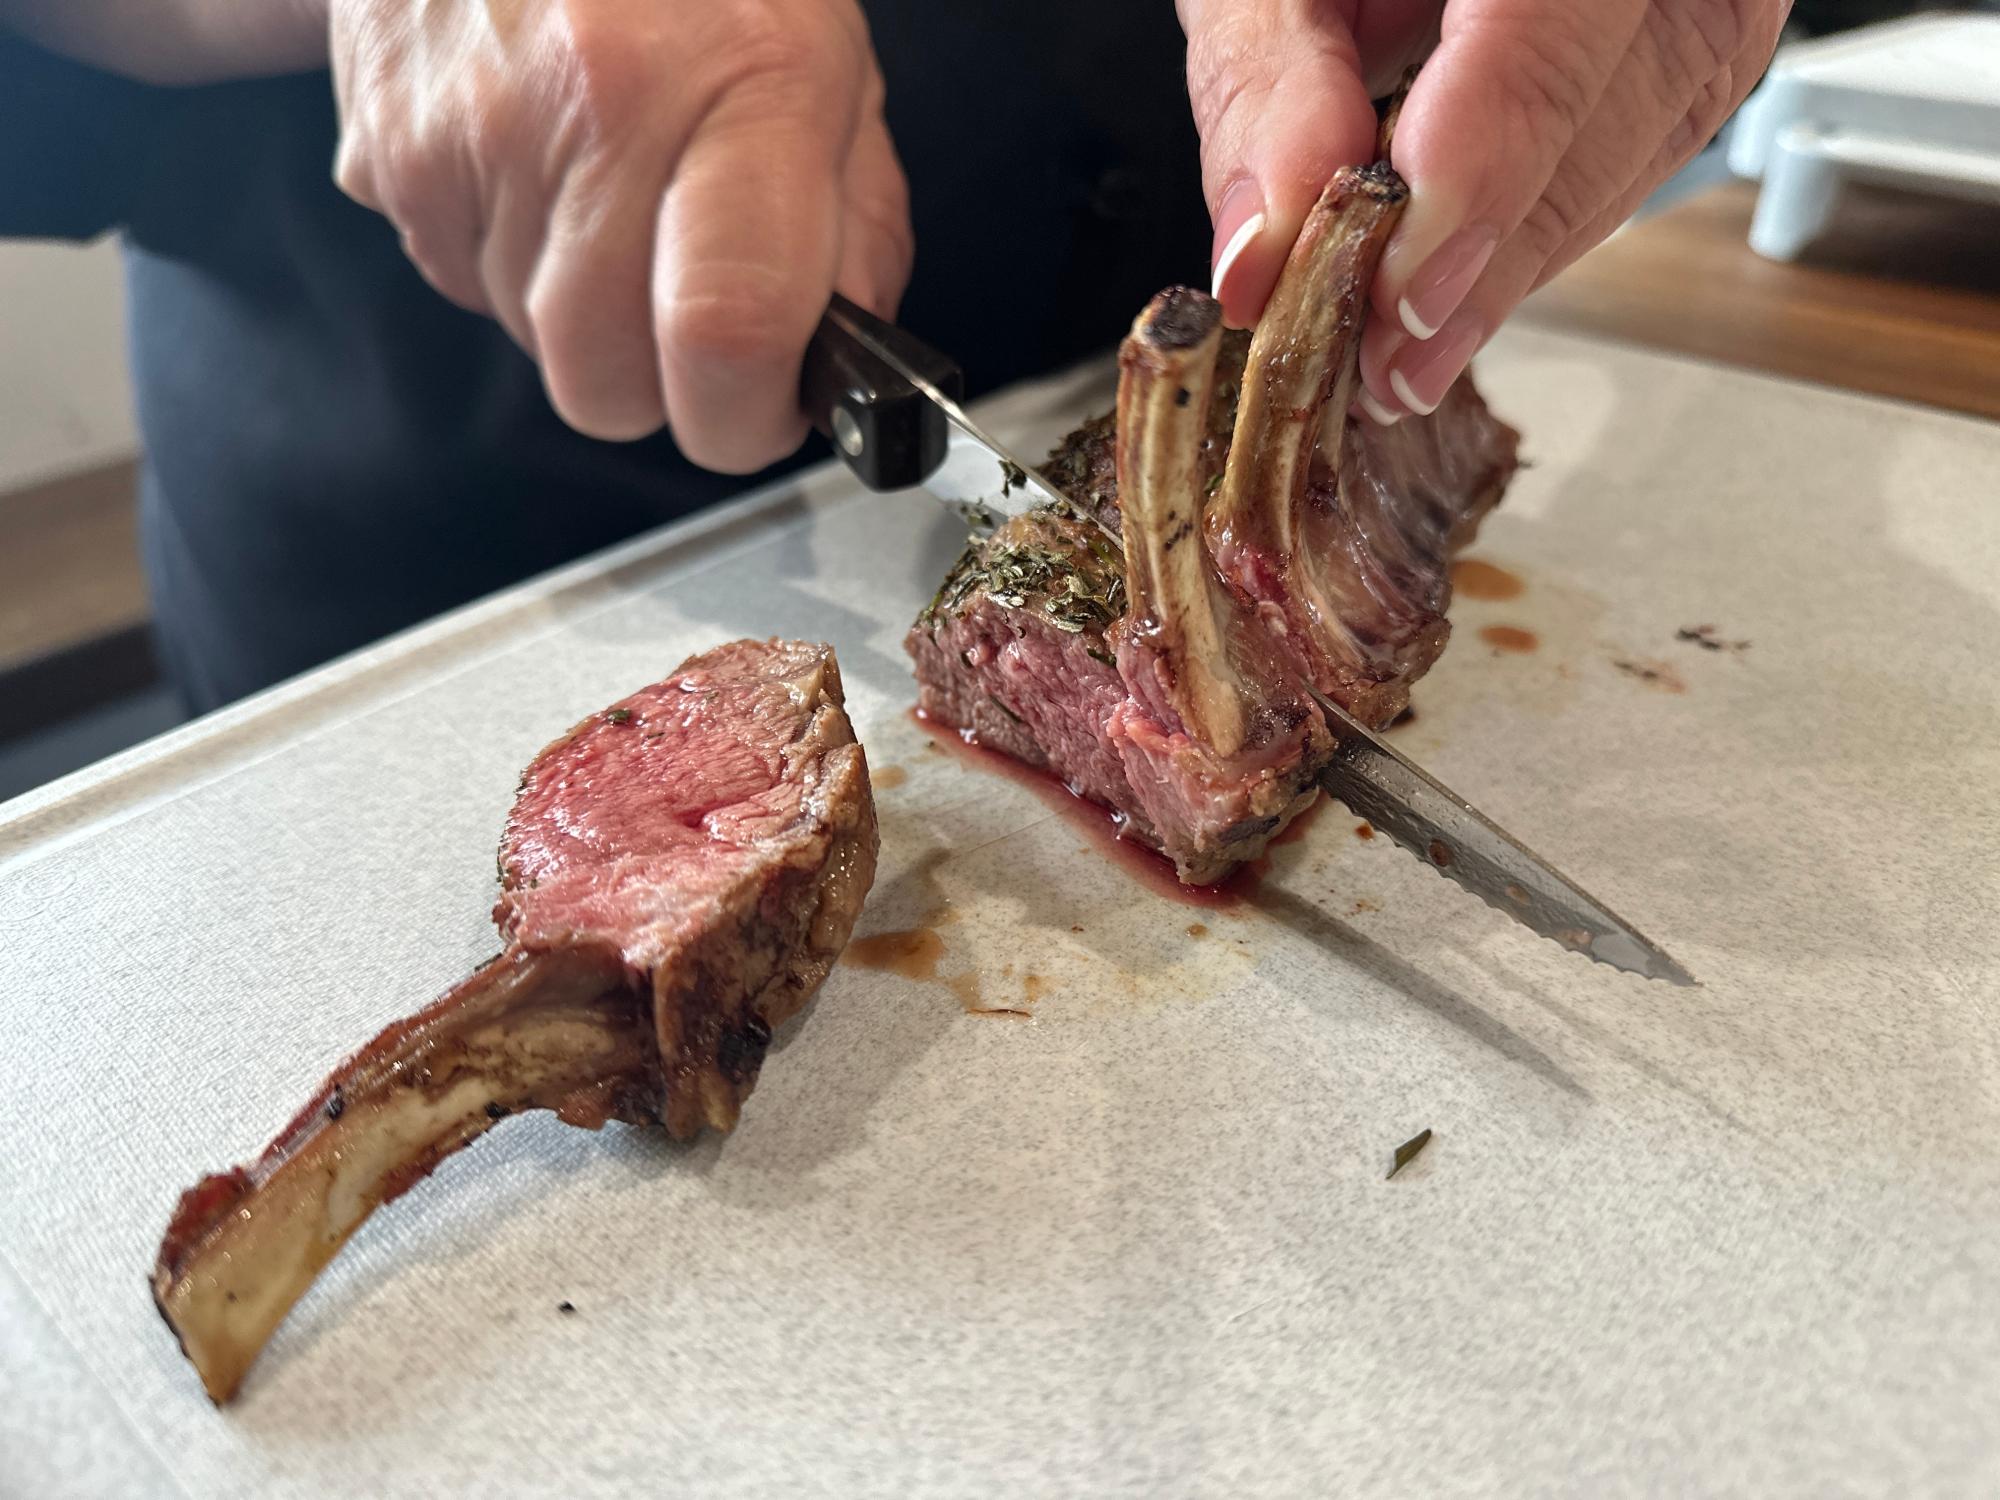 Slicing the lamb chops with a Trimmer.